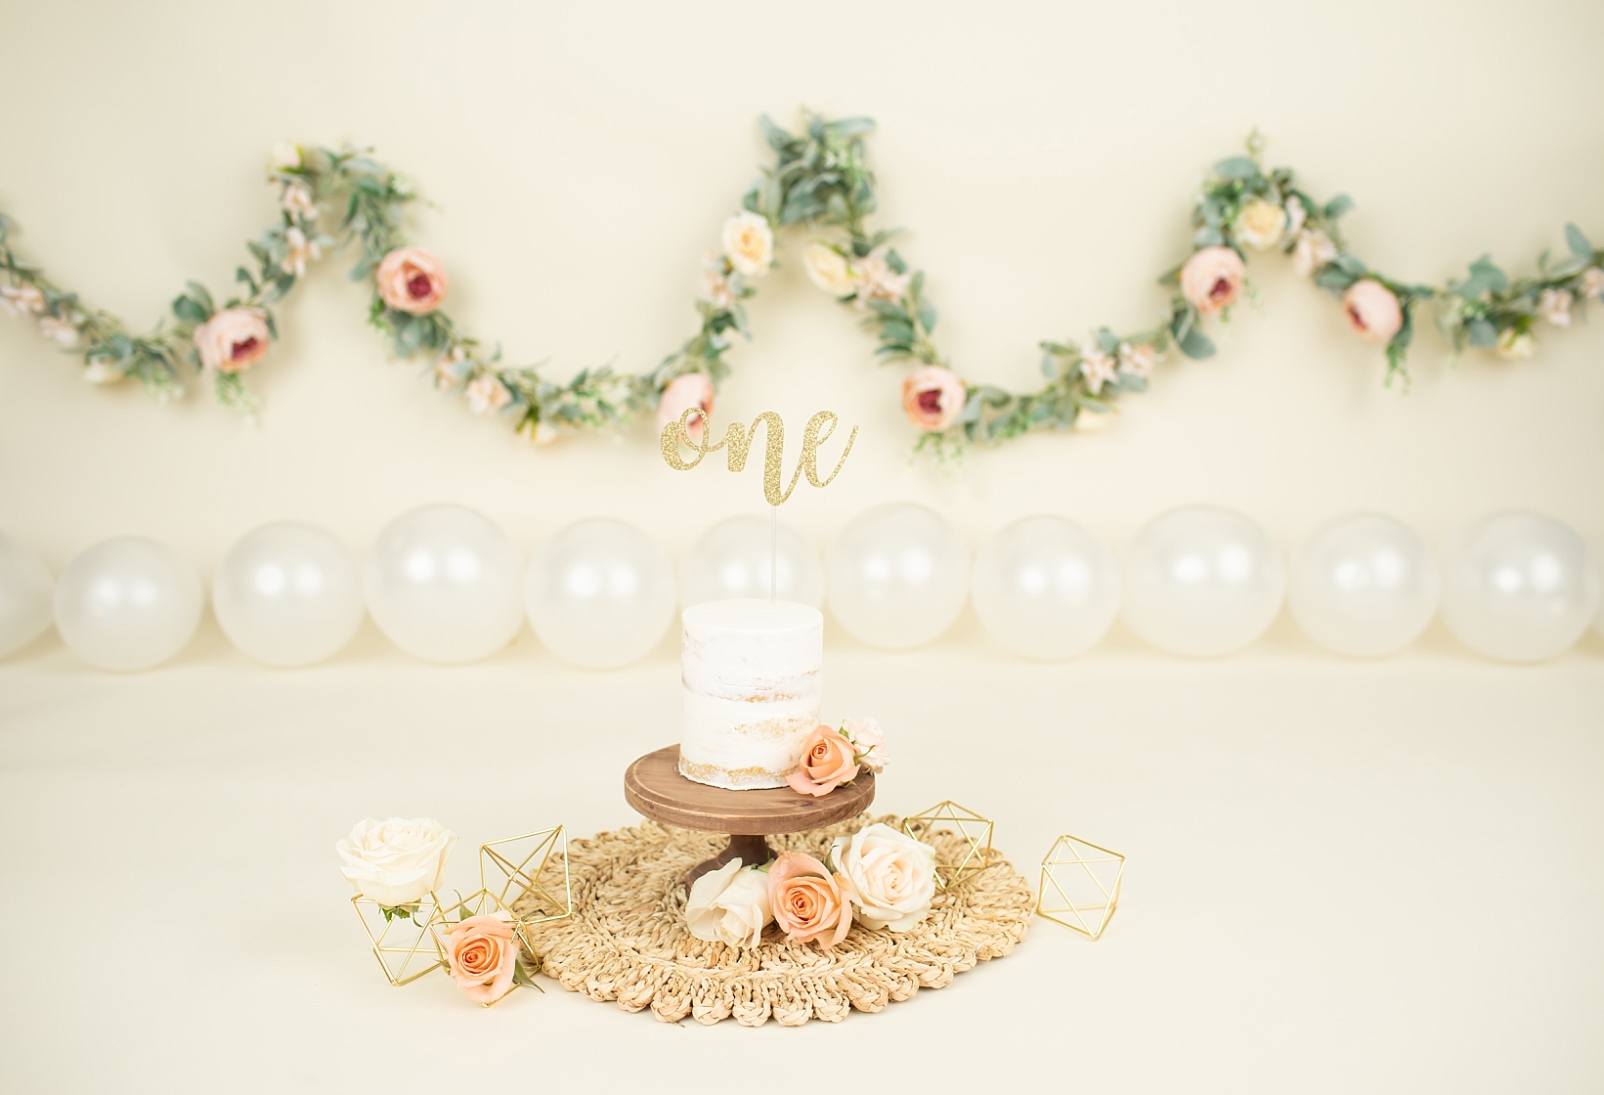 Cake smash cake with fresh flower adornment and gold geometric shapes and a floral garland background
